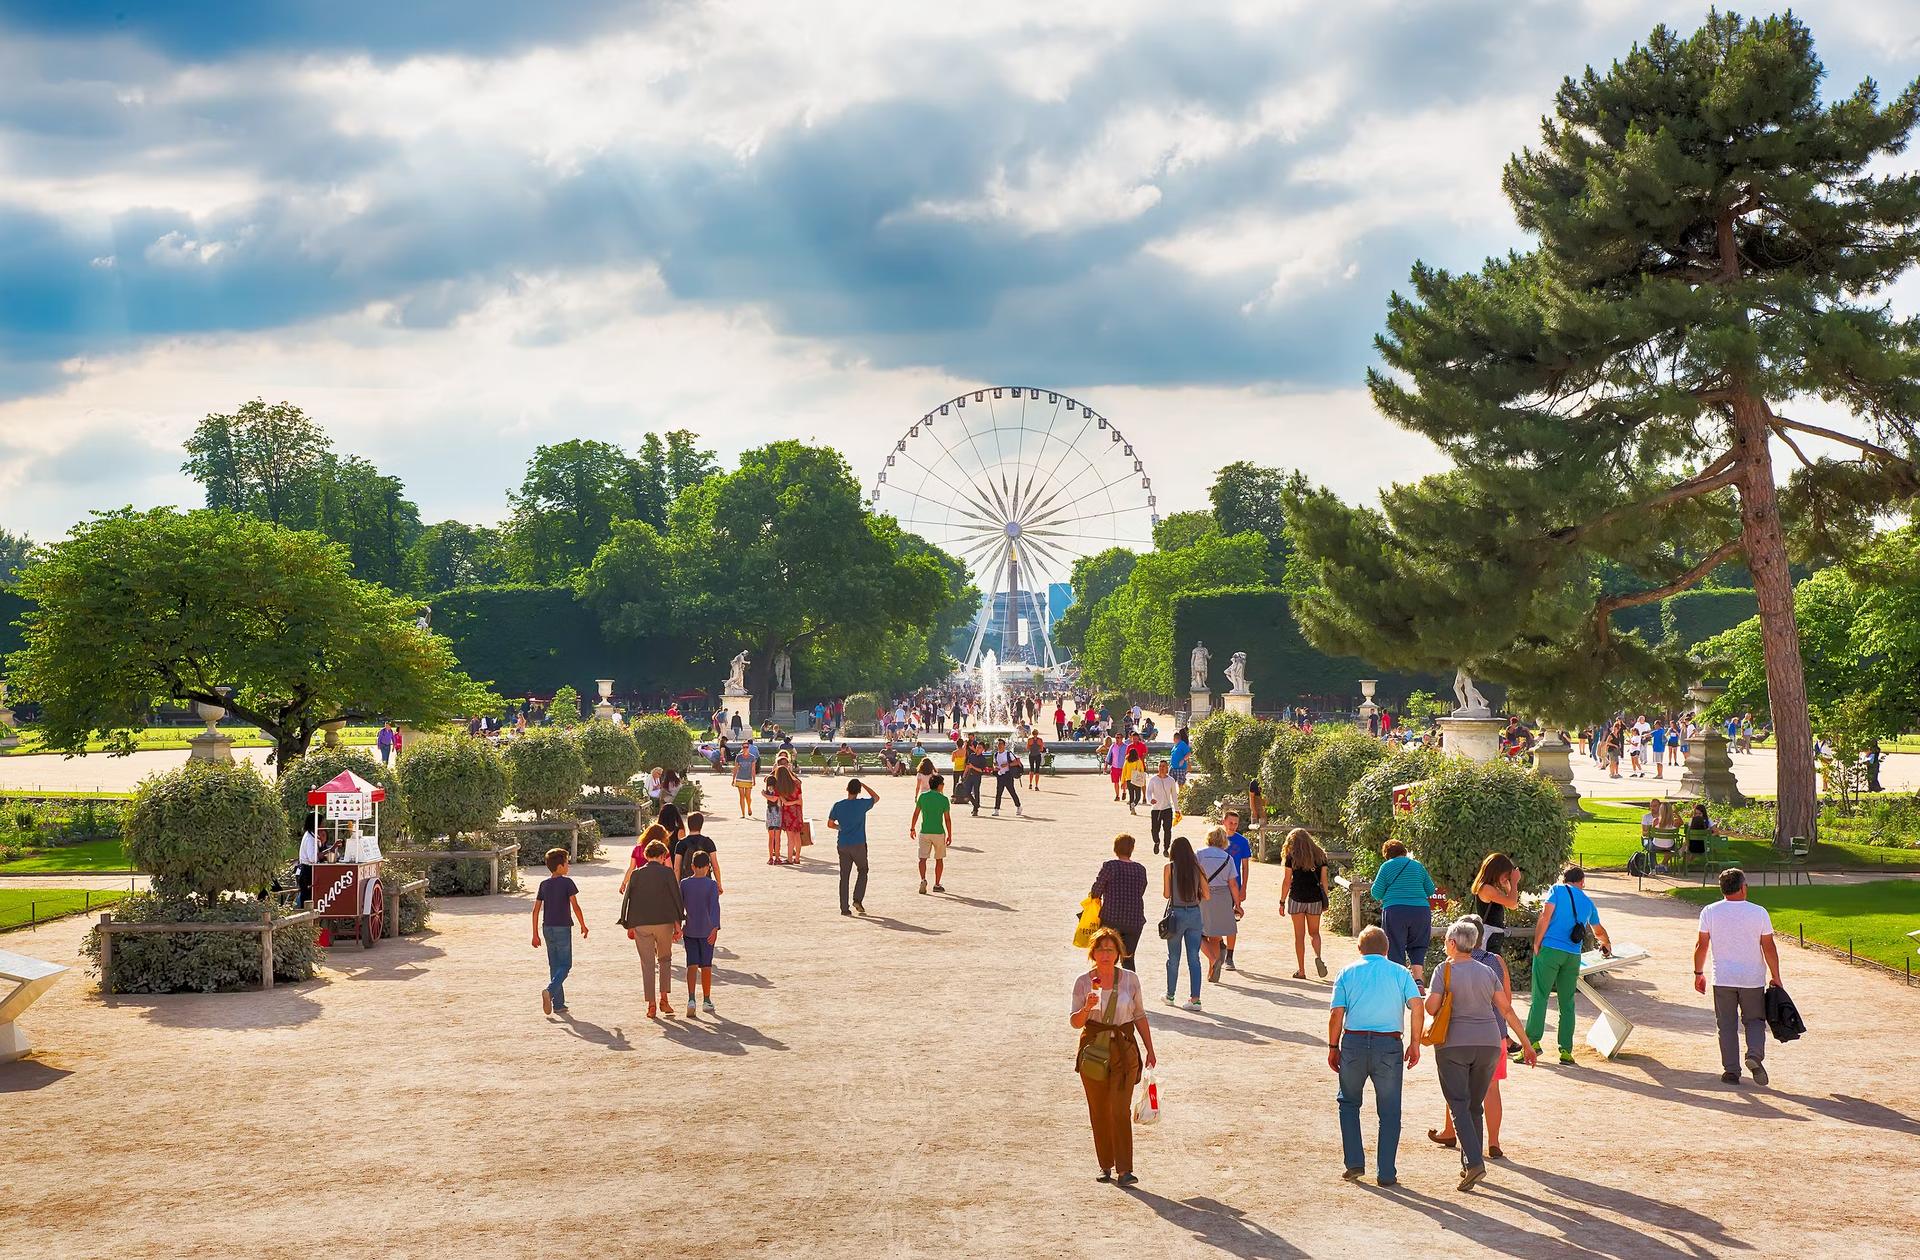 Separate groups of people walk down a wide pathway through a garden towards a large Ferris wheel in the distance 